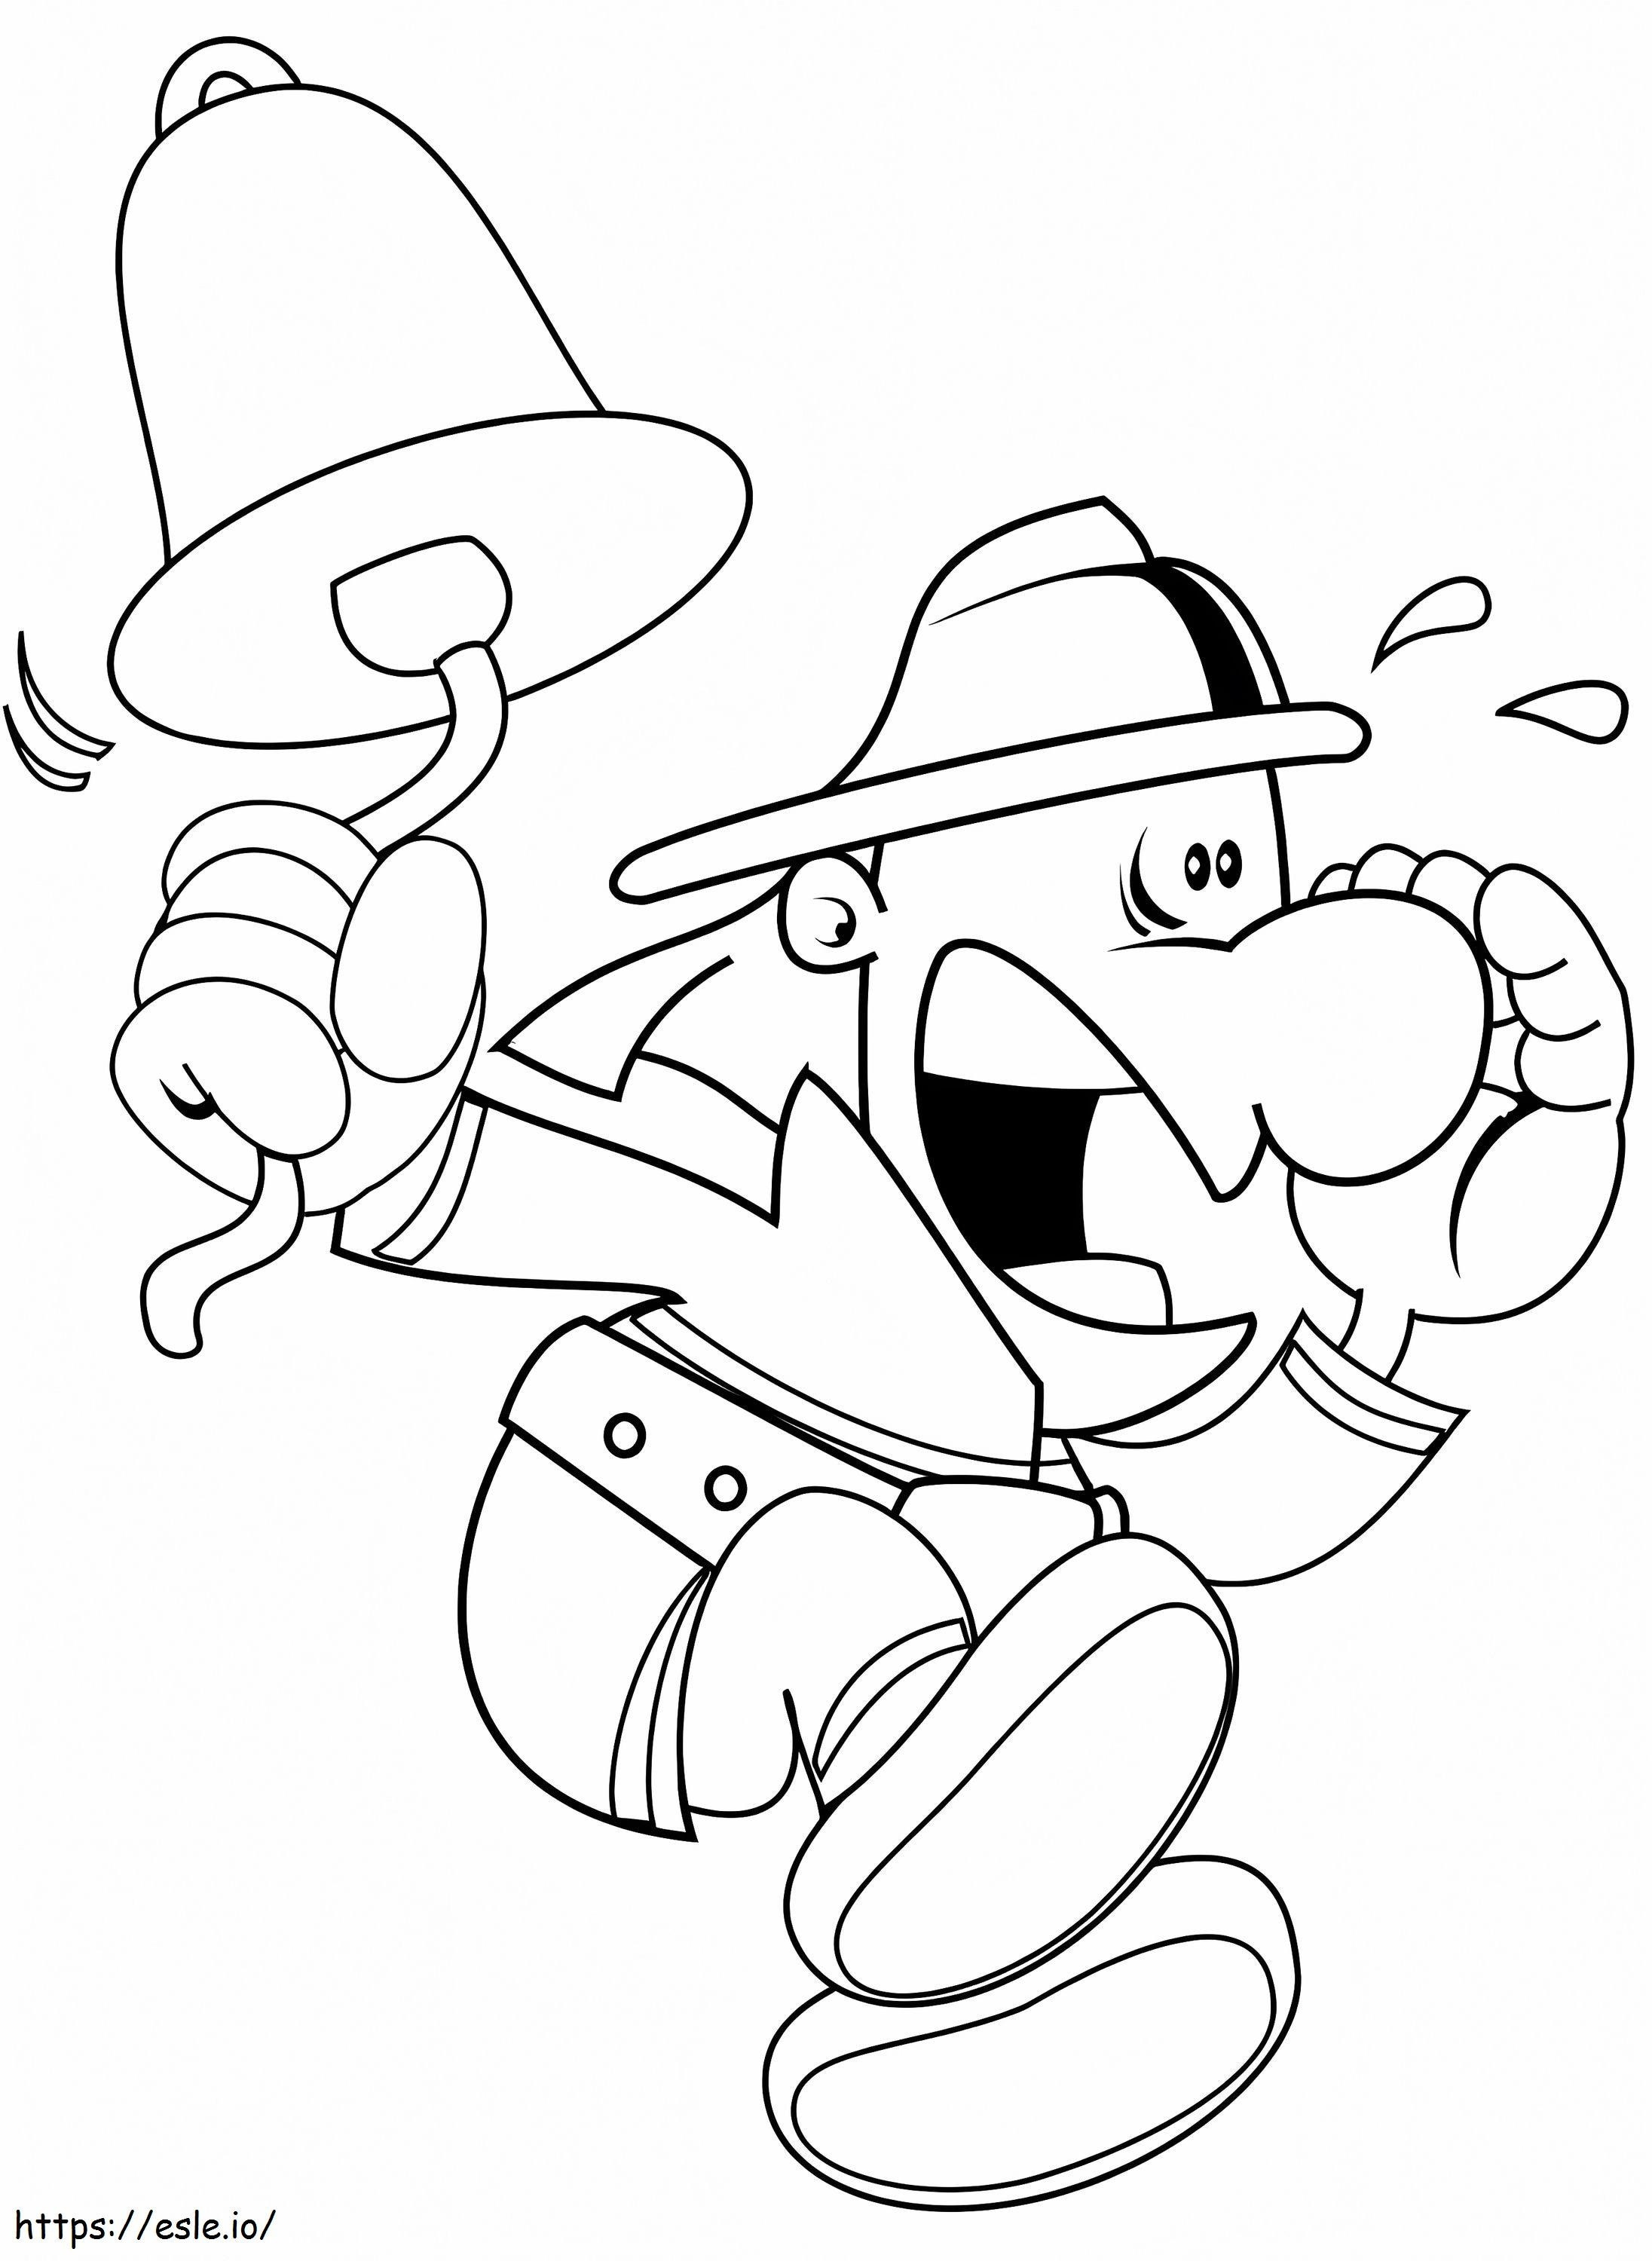 Fireman Ringing A Bell coloring page